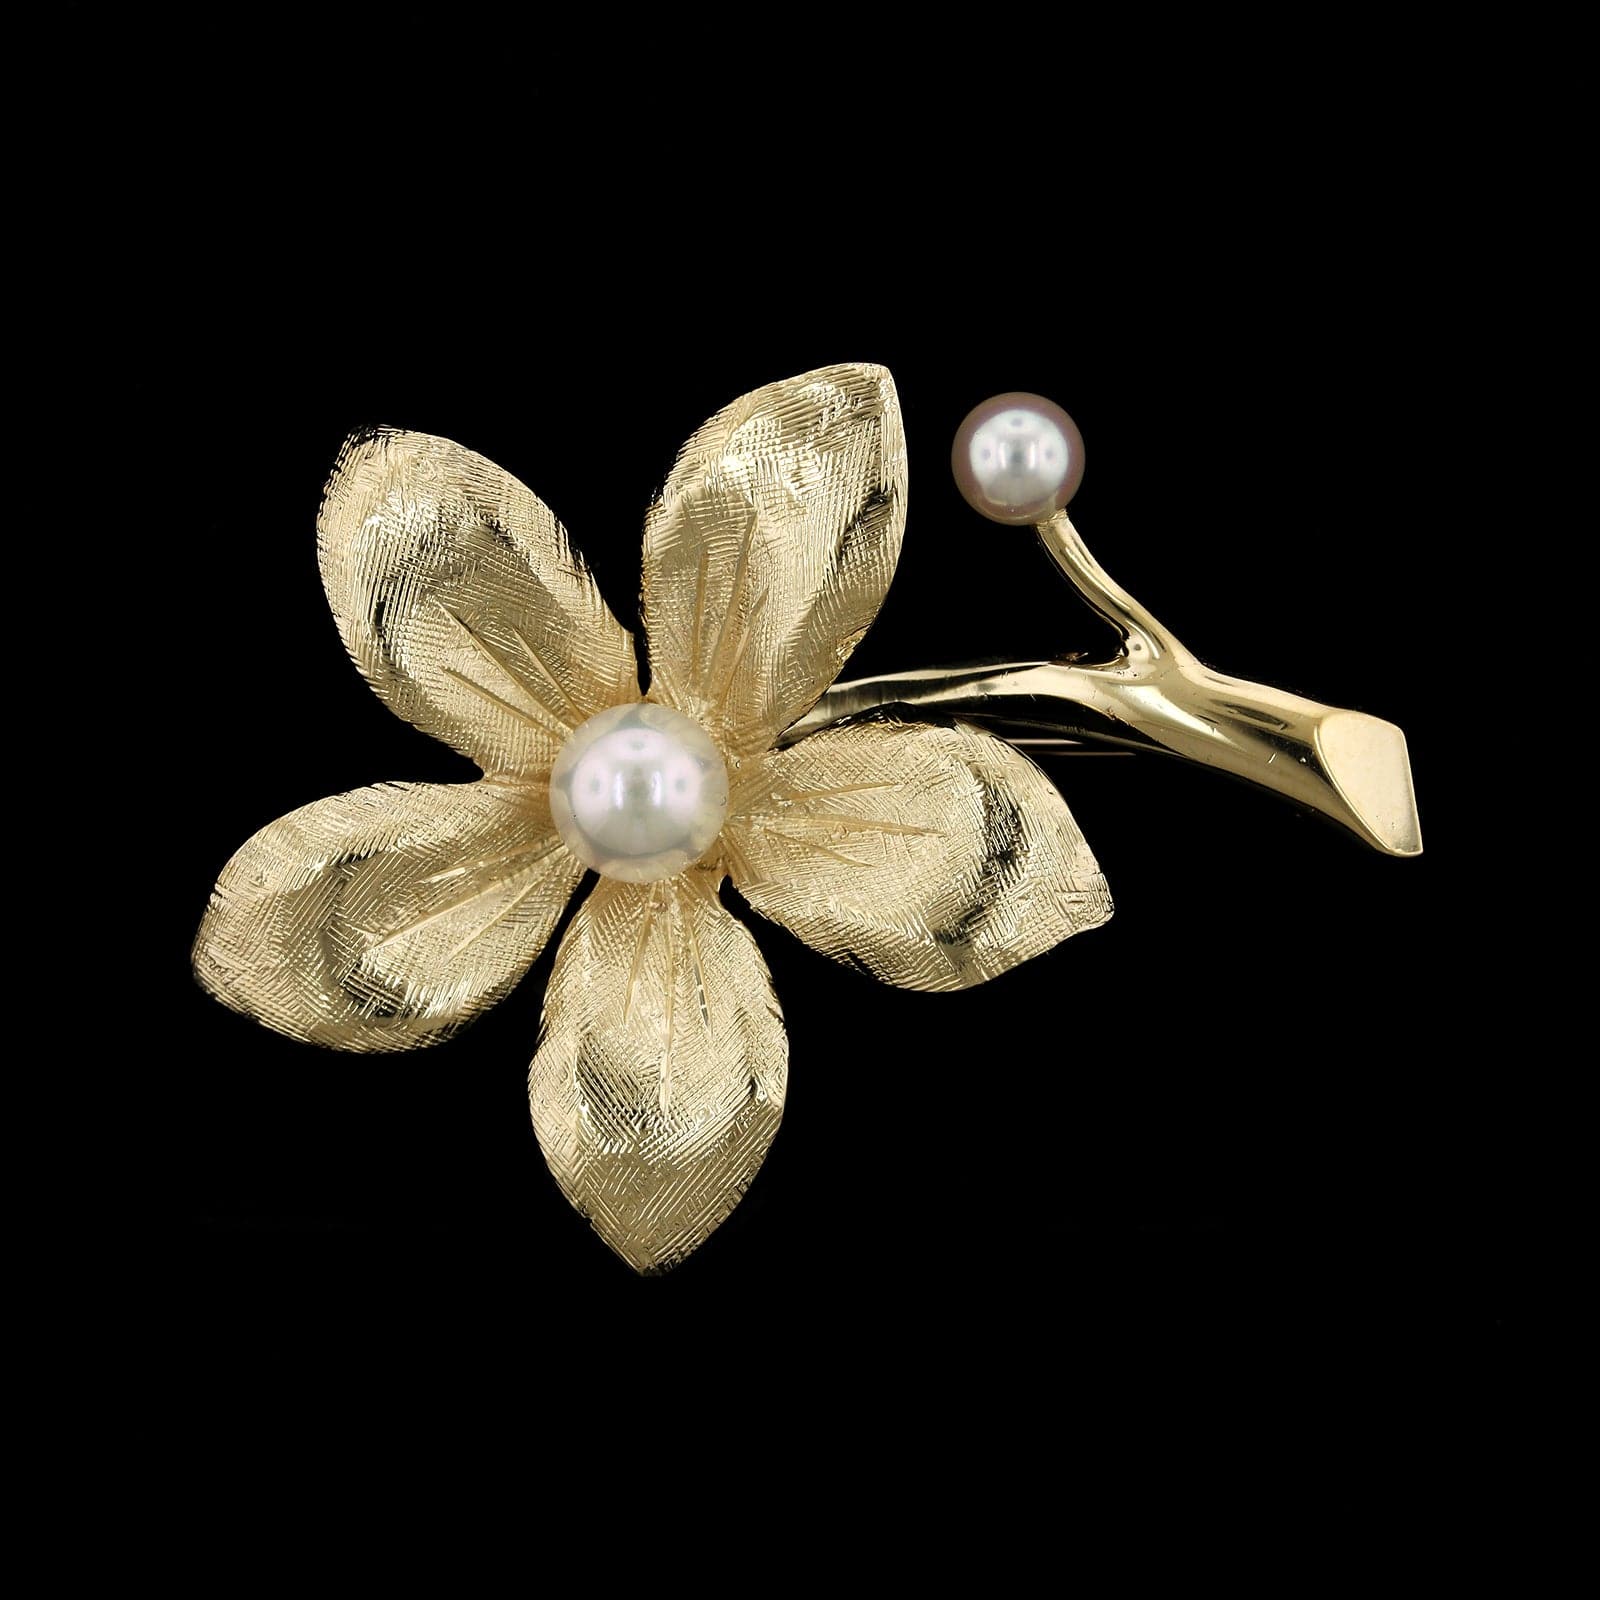 Ever Blossom Brooch, Yellow Gold, Onyx & Diamonds - Jewelry - Categories